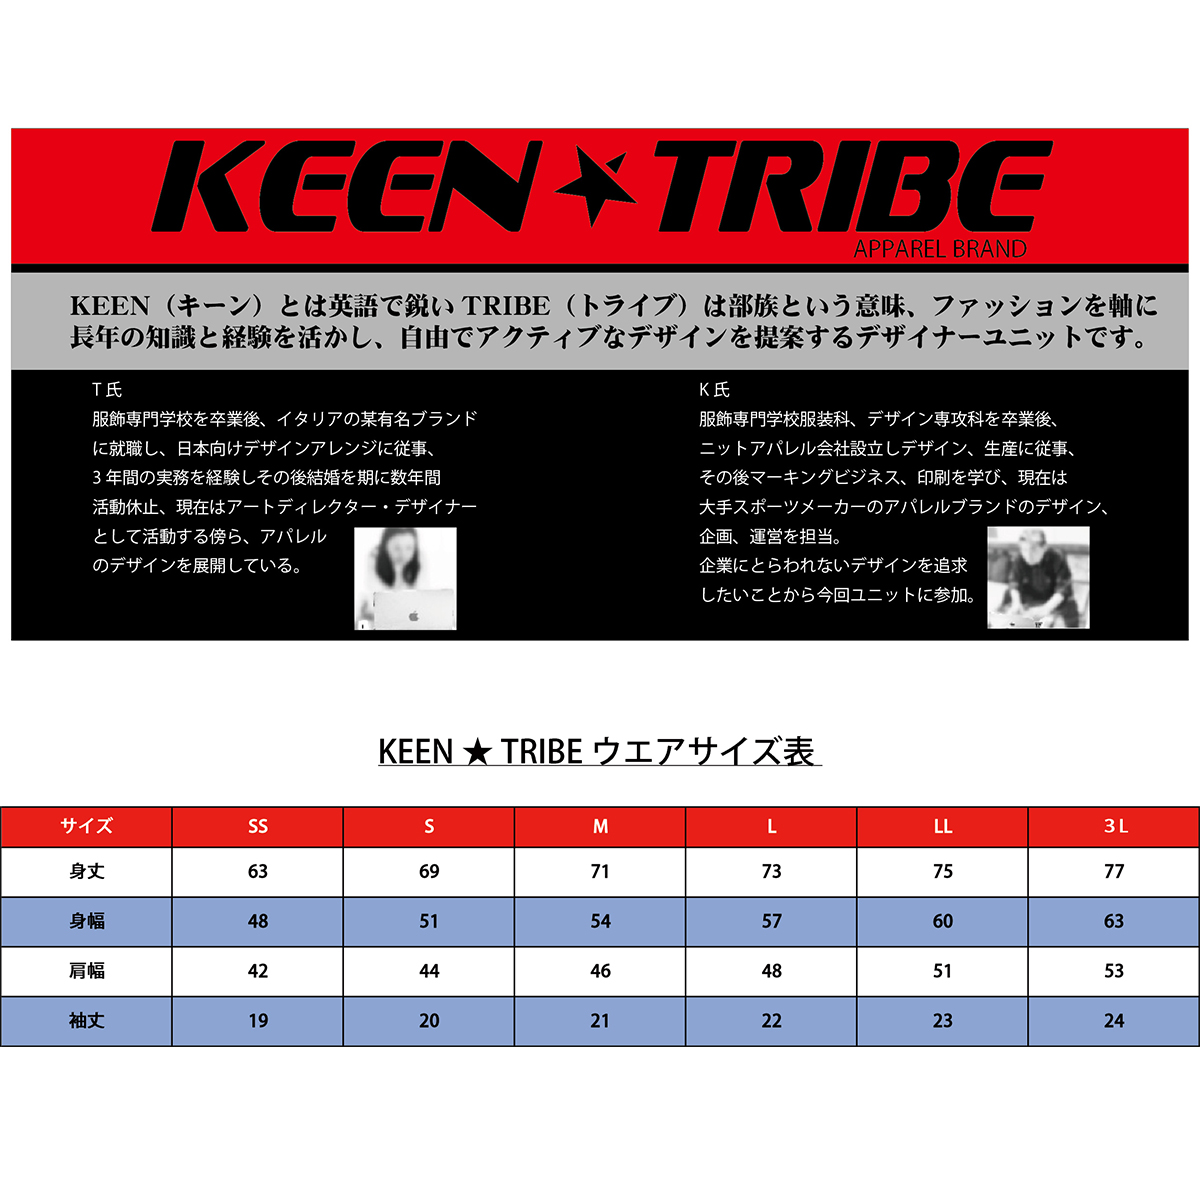 KEEN ★ TRIBE　KT-53(受注生産)